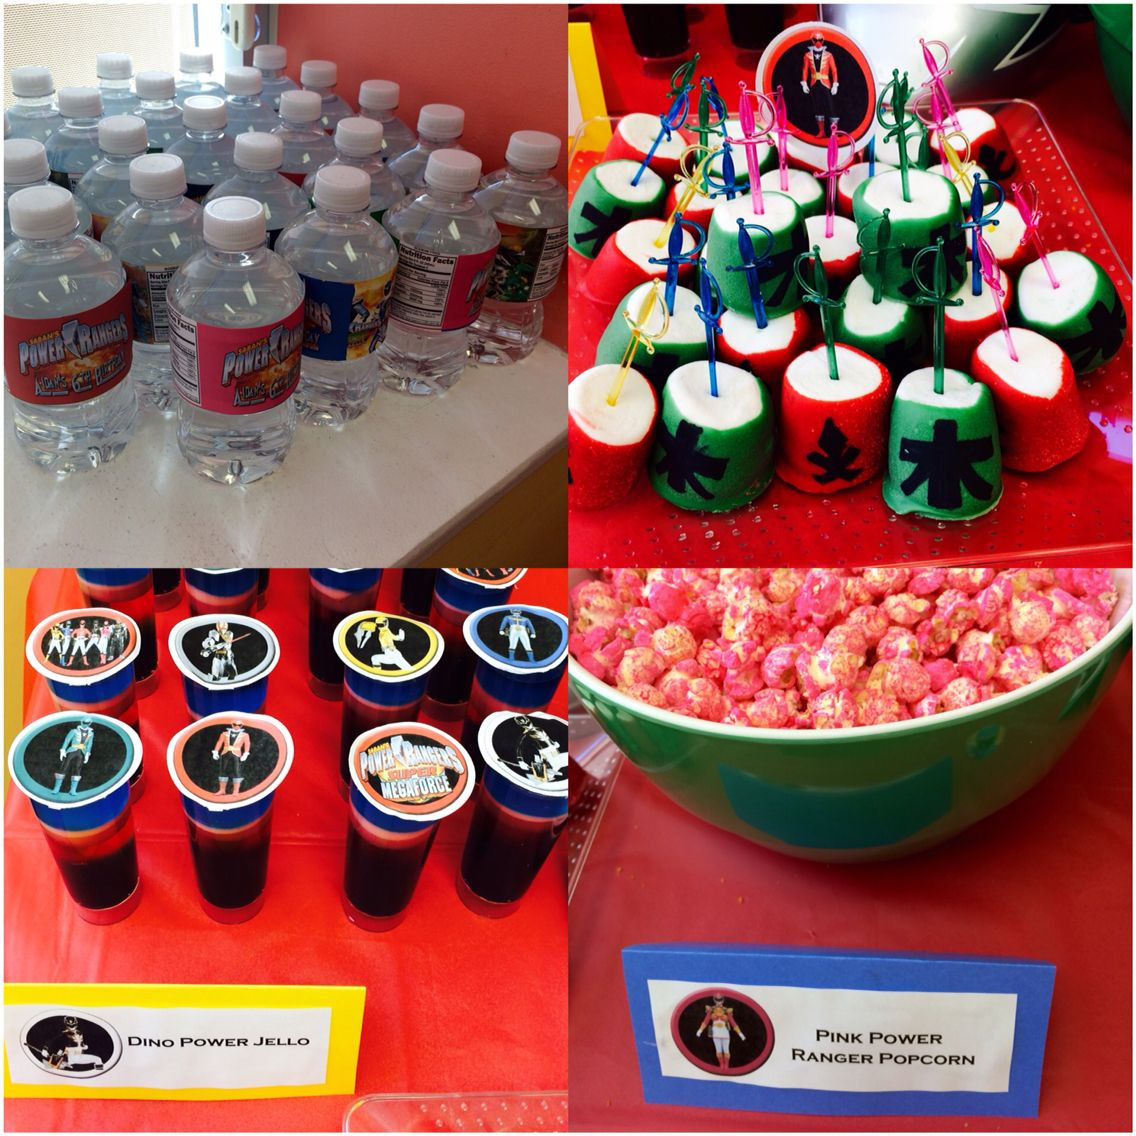 Power Rangers Party Food Ideas
 Power ranger party food ideas